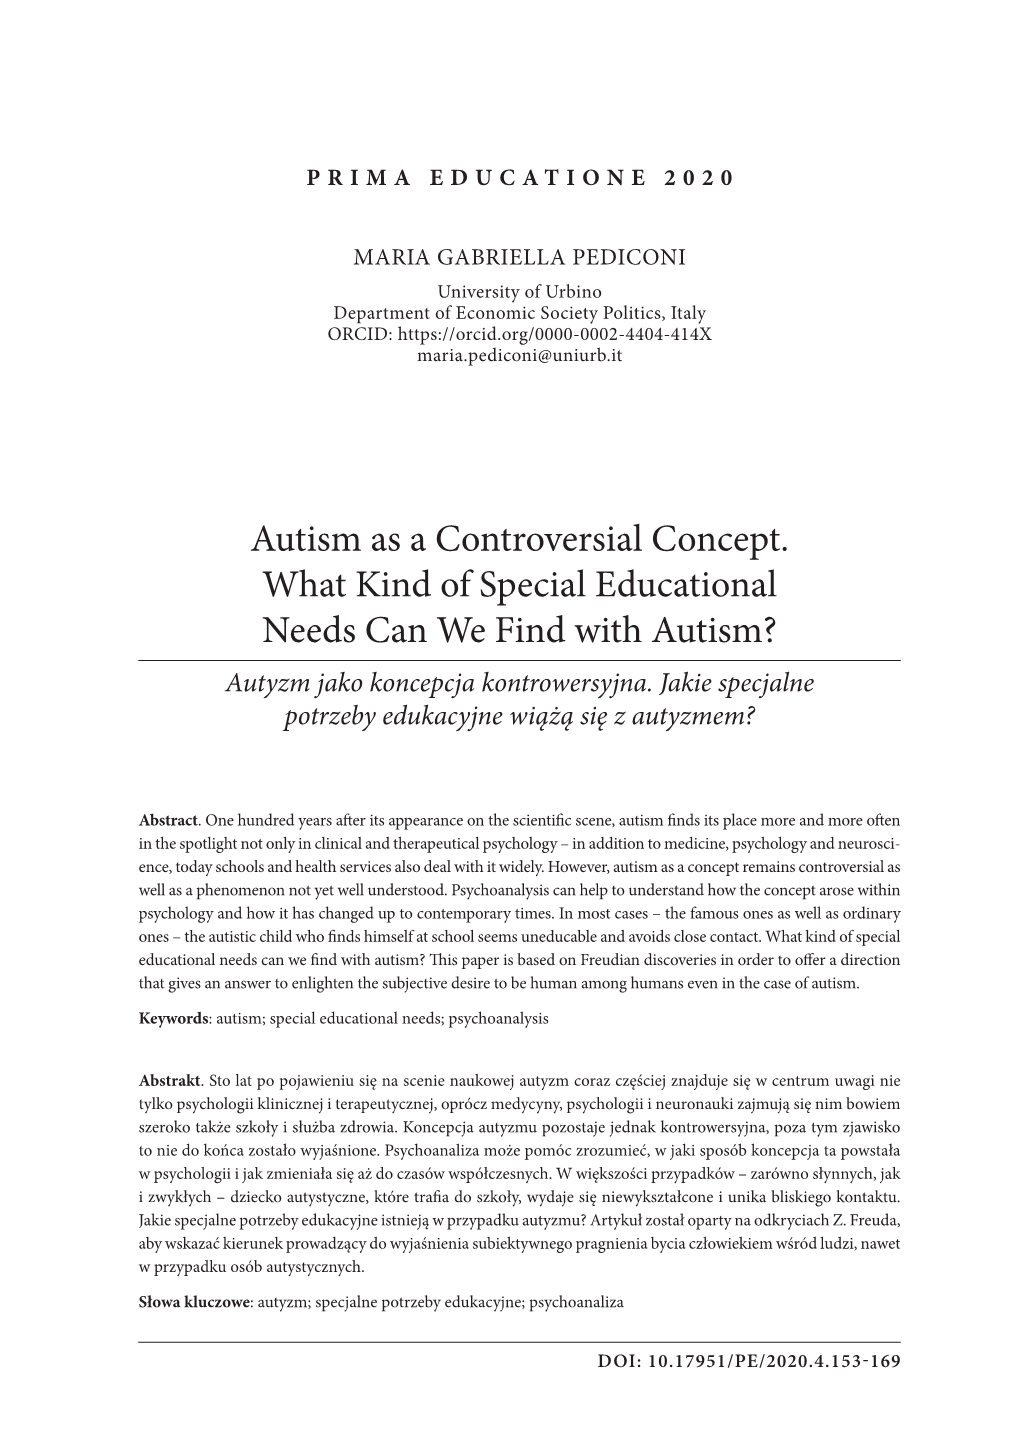 Autism As a Controversial Concept. What Kind of Special Educational Needs Can We Find with Autism? Autyzm Jako Koncepcja Kontrowersyjna